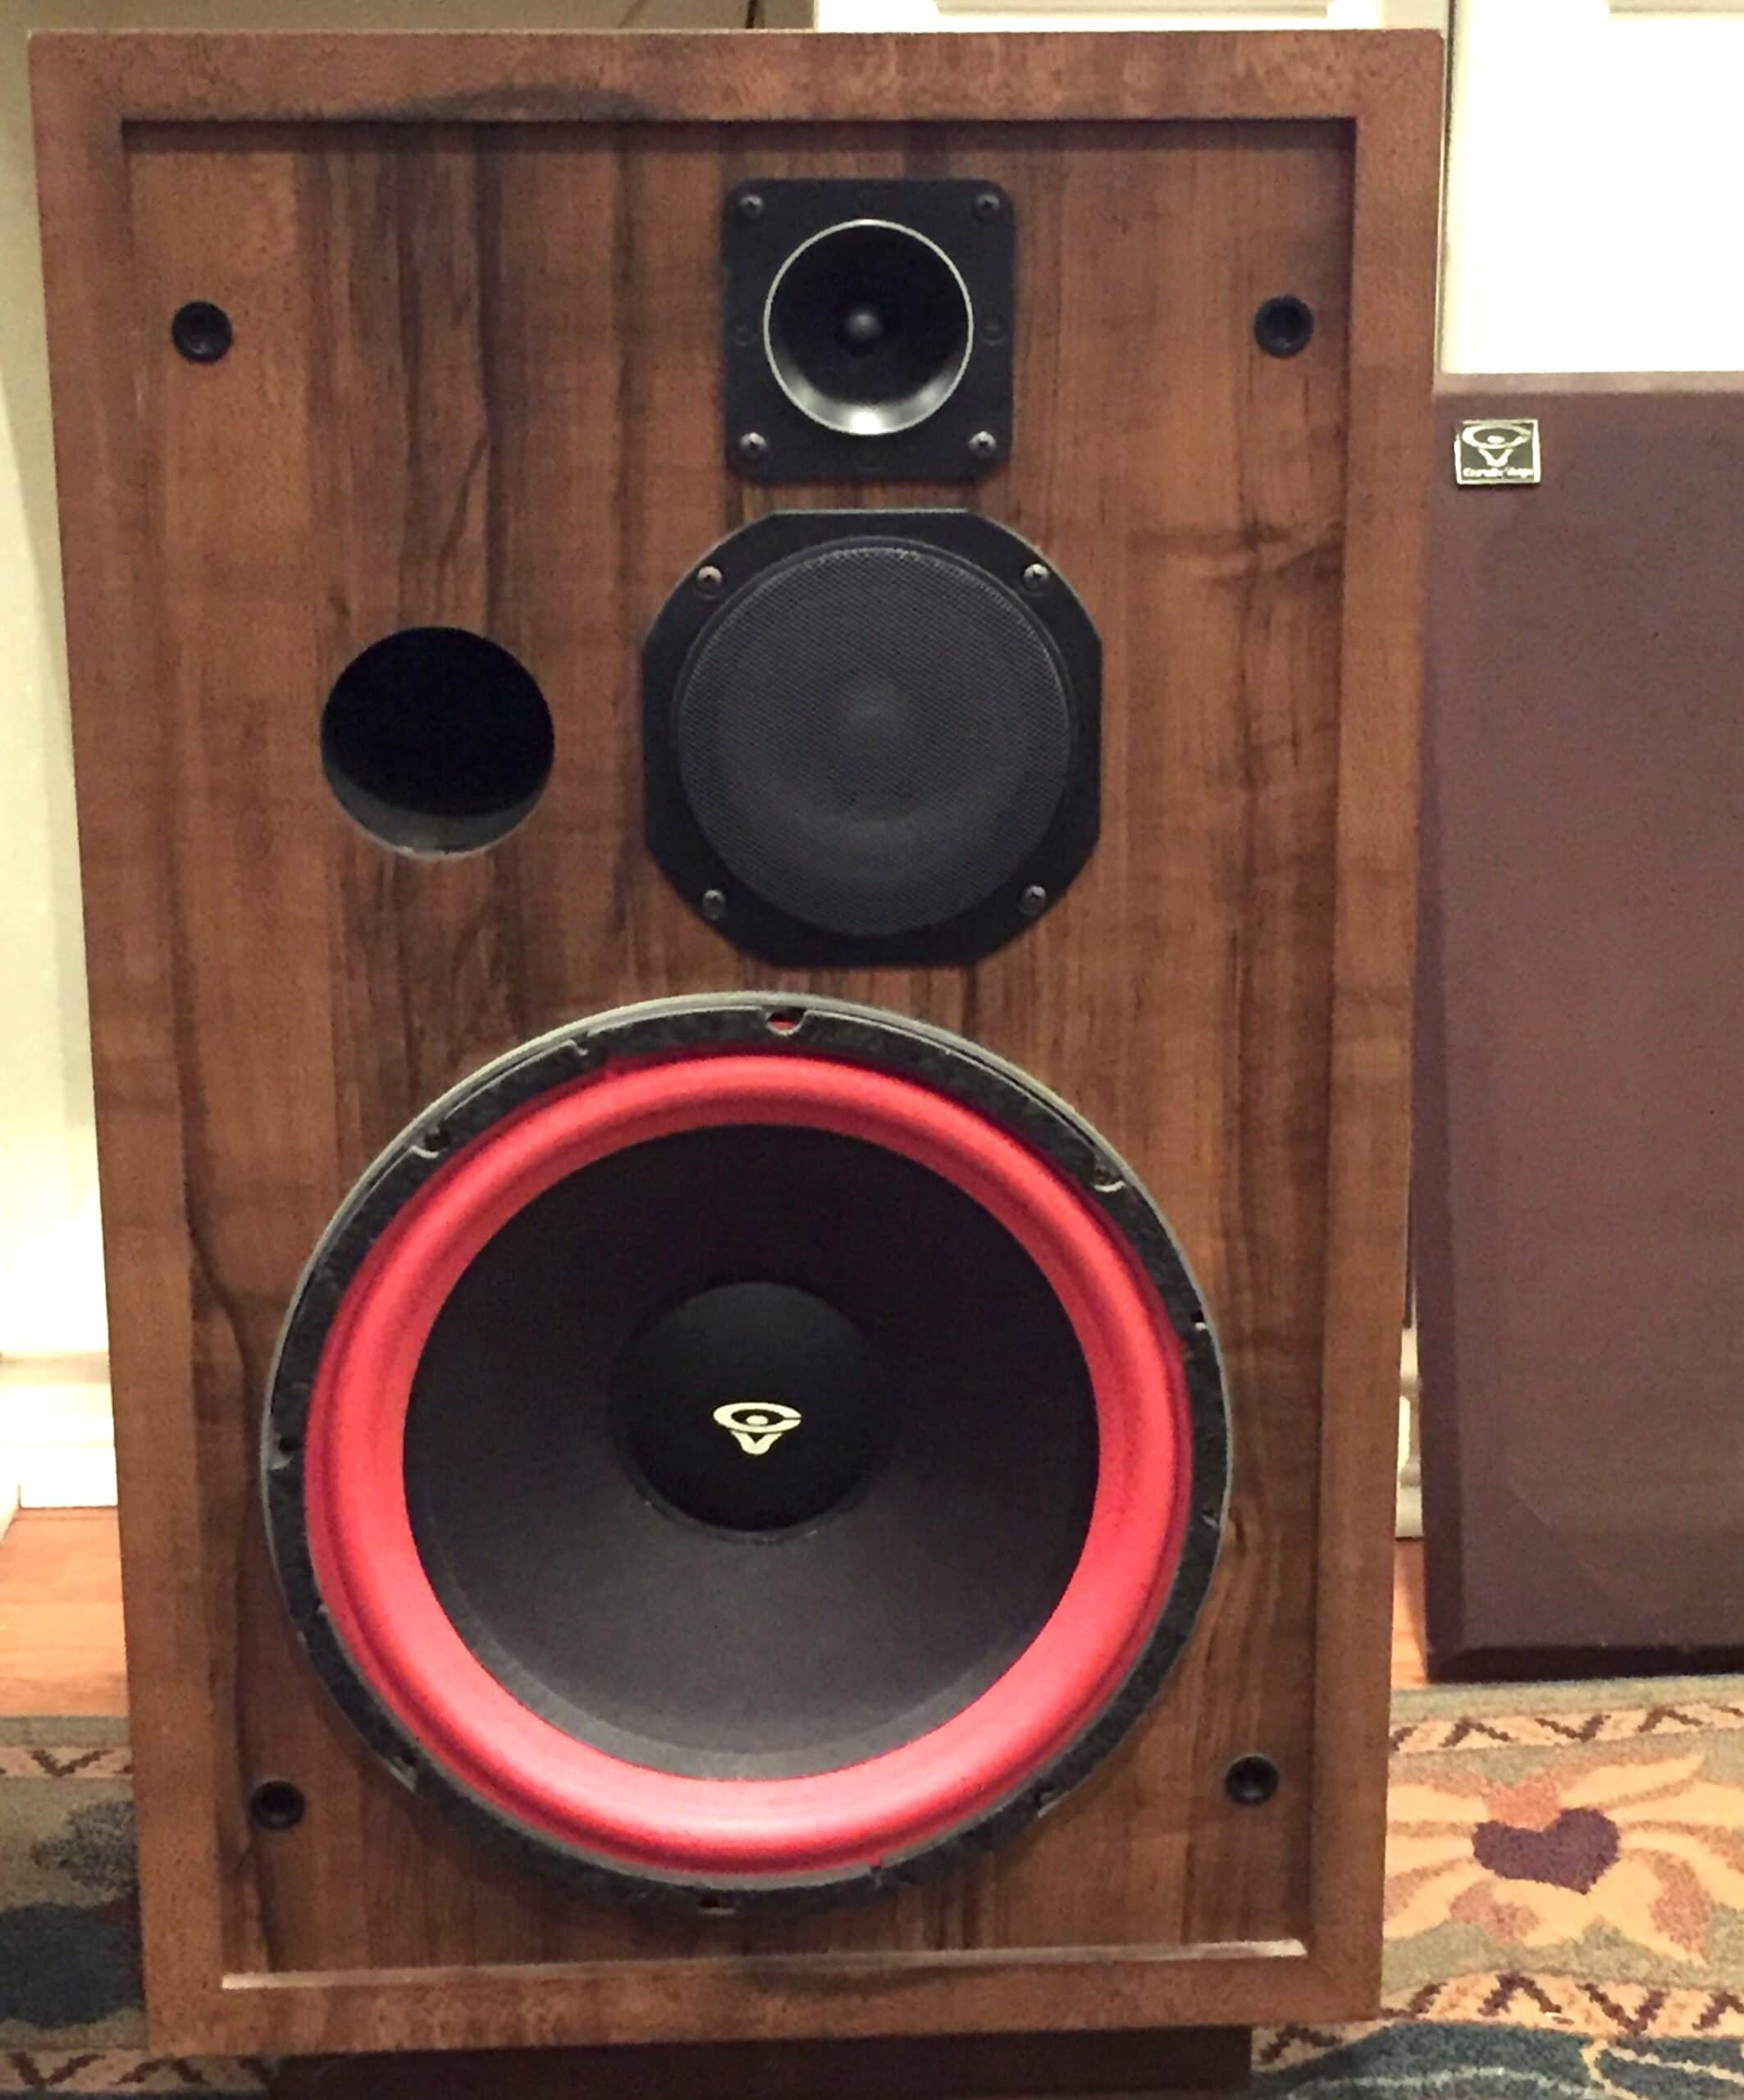 Vintage Cerwin-Vega D-5 speakers with that familiar red woofer surround. These have front ports though!